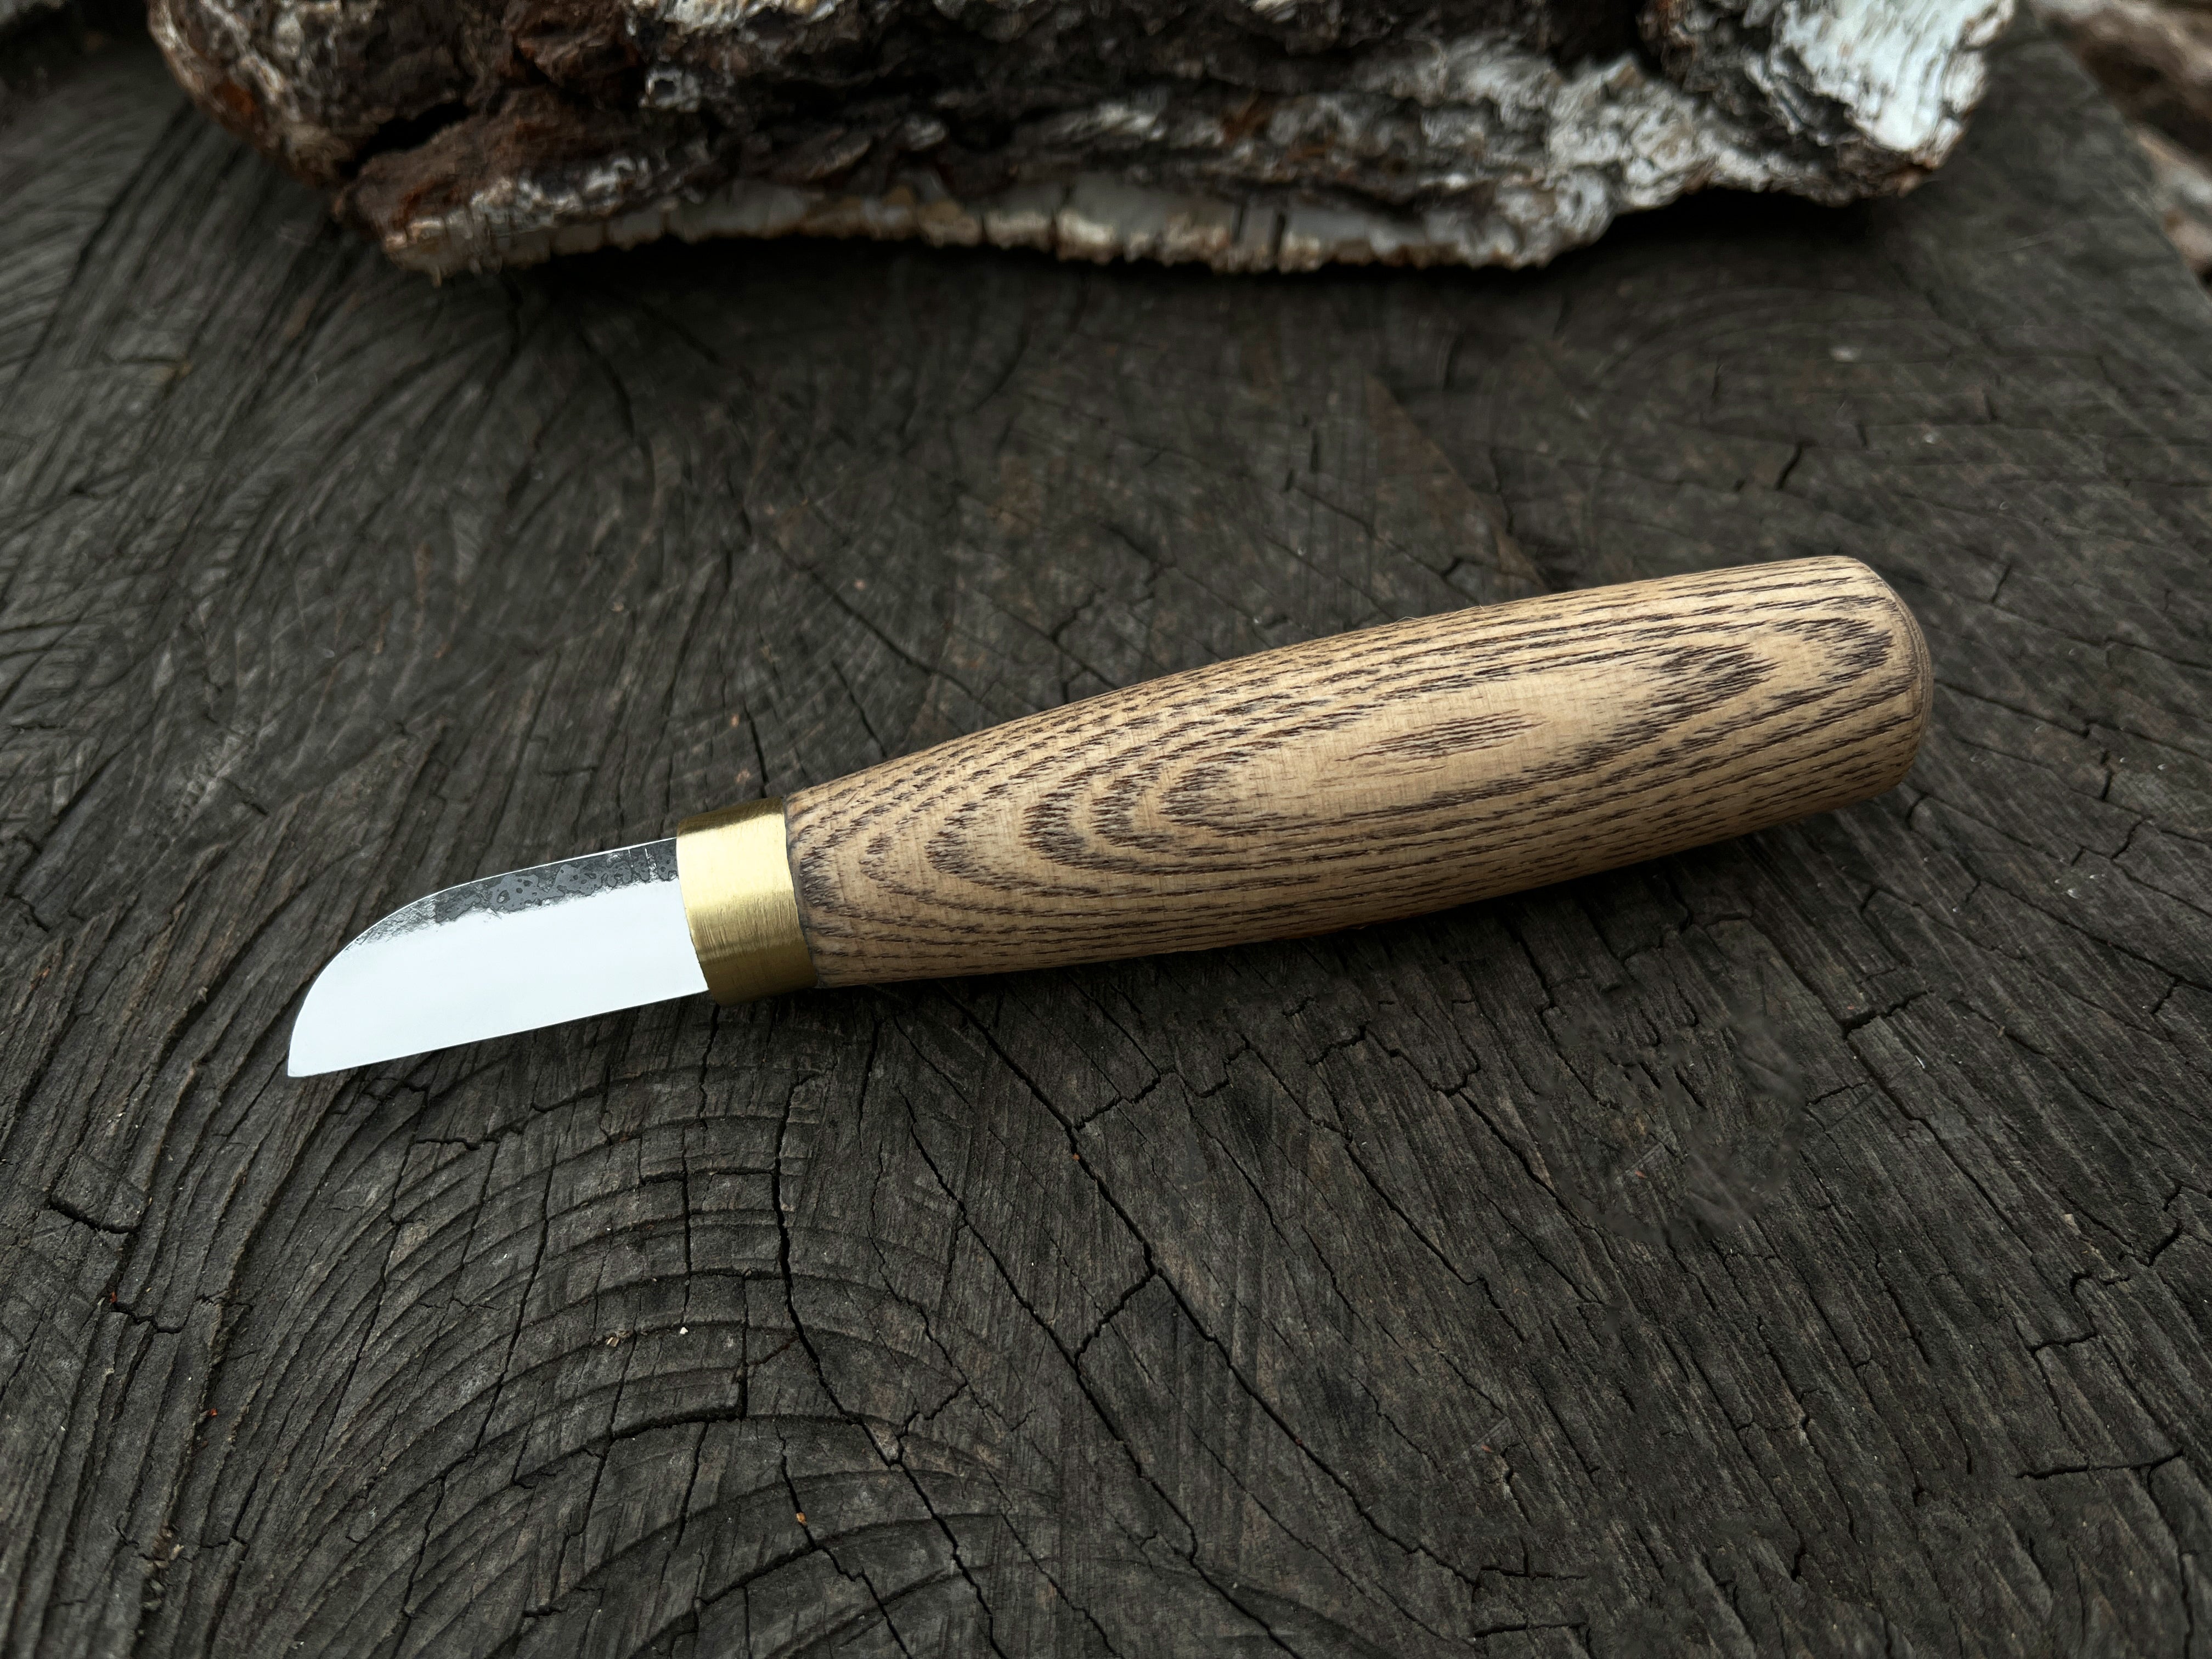 Hand-Forged Small Chip Carving Knife, 3.5 cm (1.4 inches)